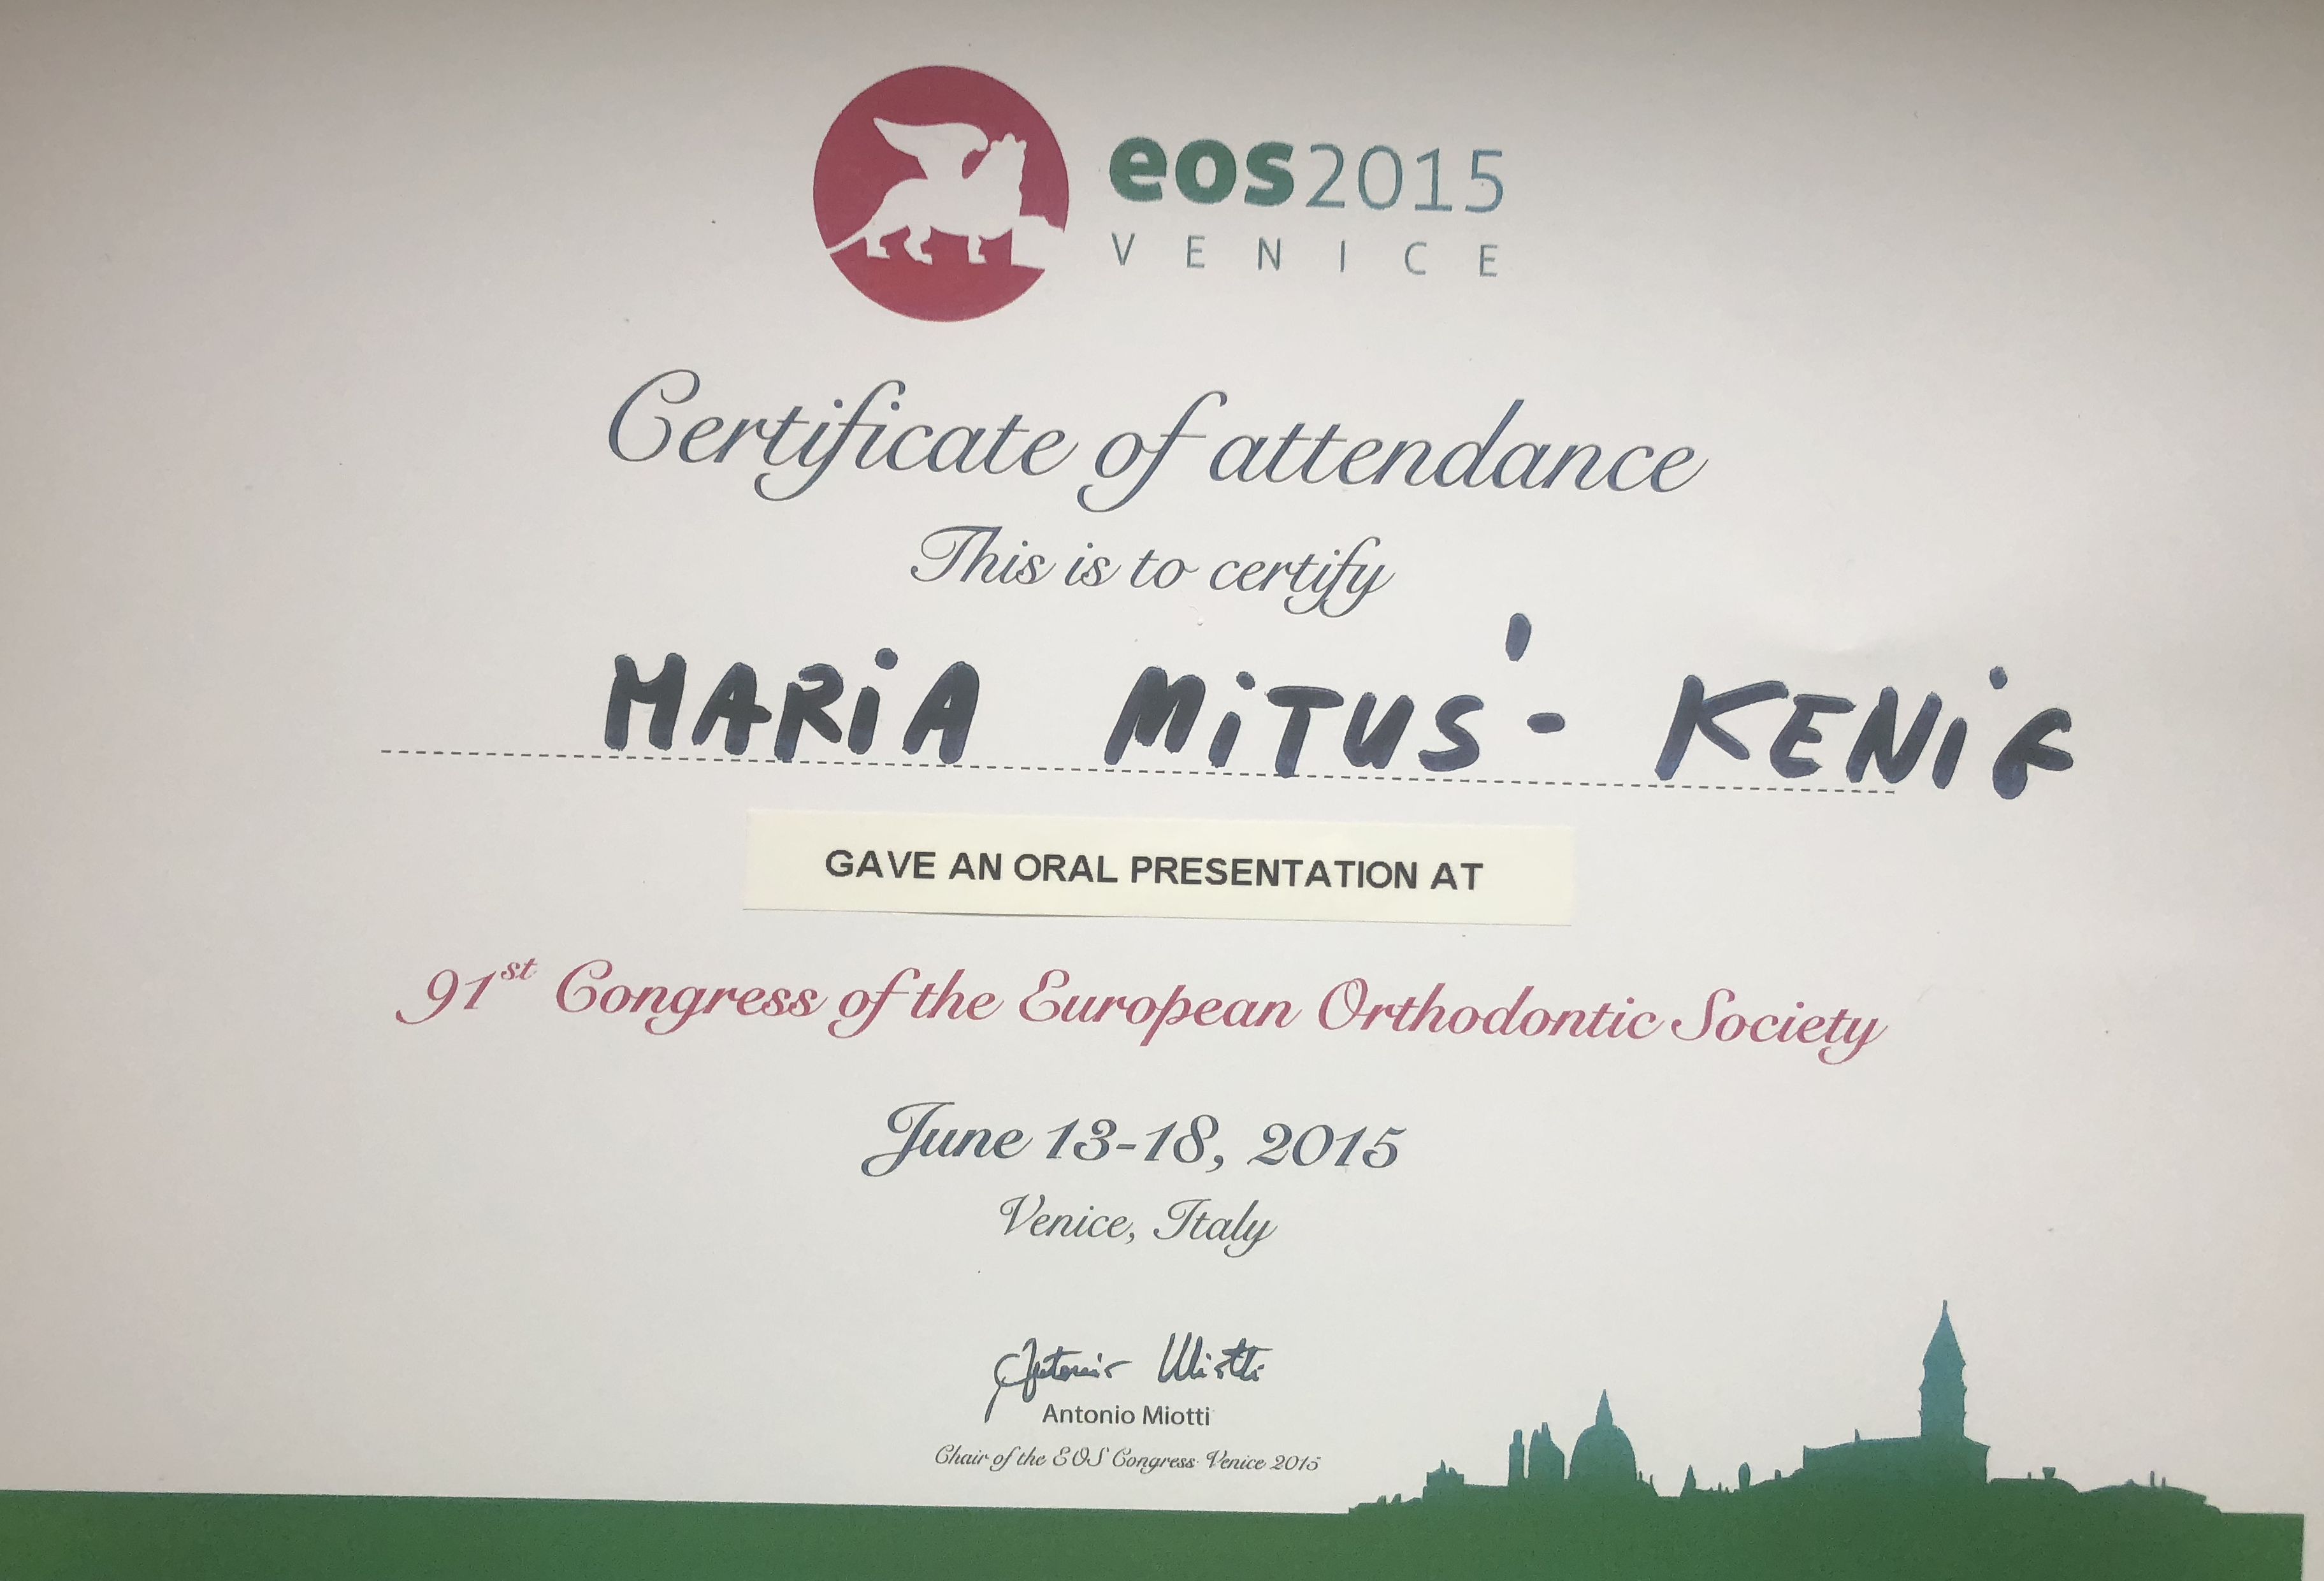 Certificate of attendance at European Orhodontic Society Congress